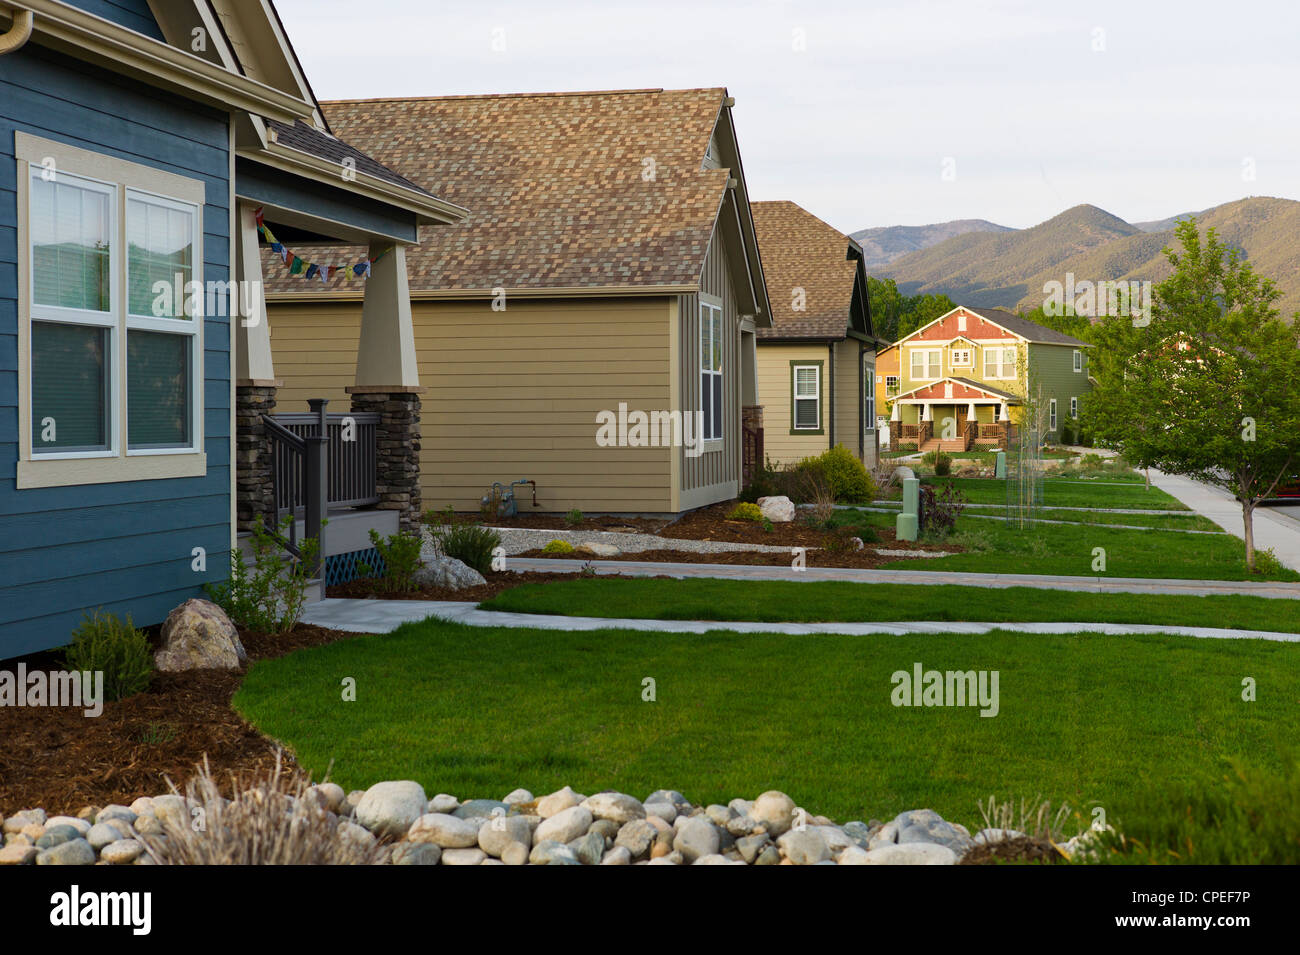 Craftsman Style residential homes in Colorado, USA Stock Photo